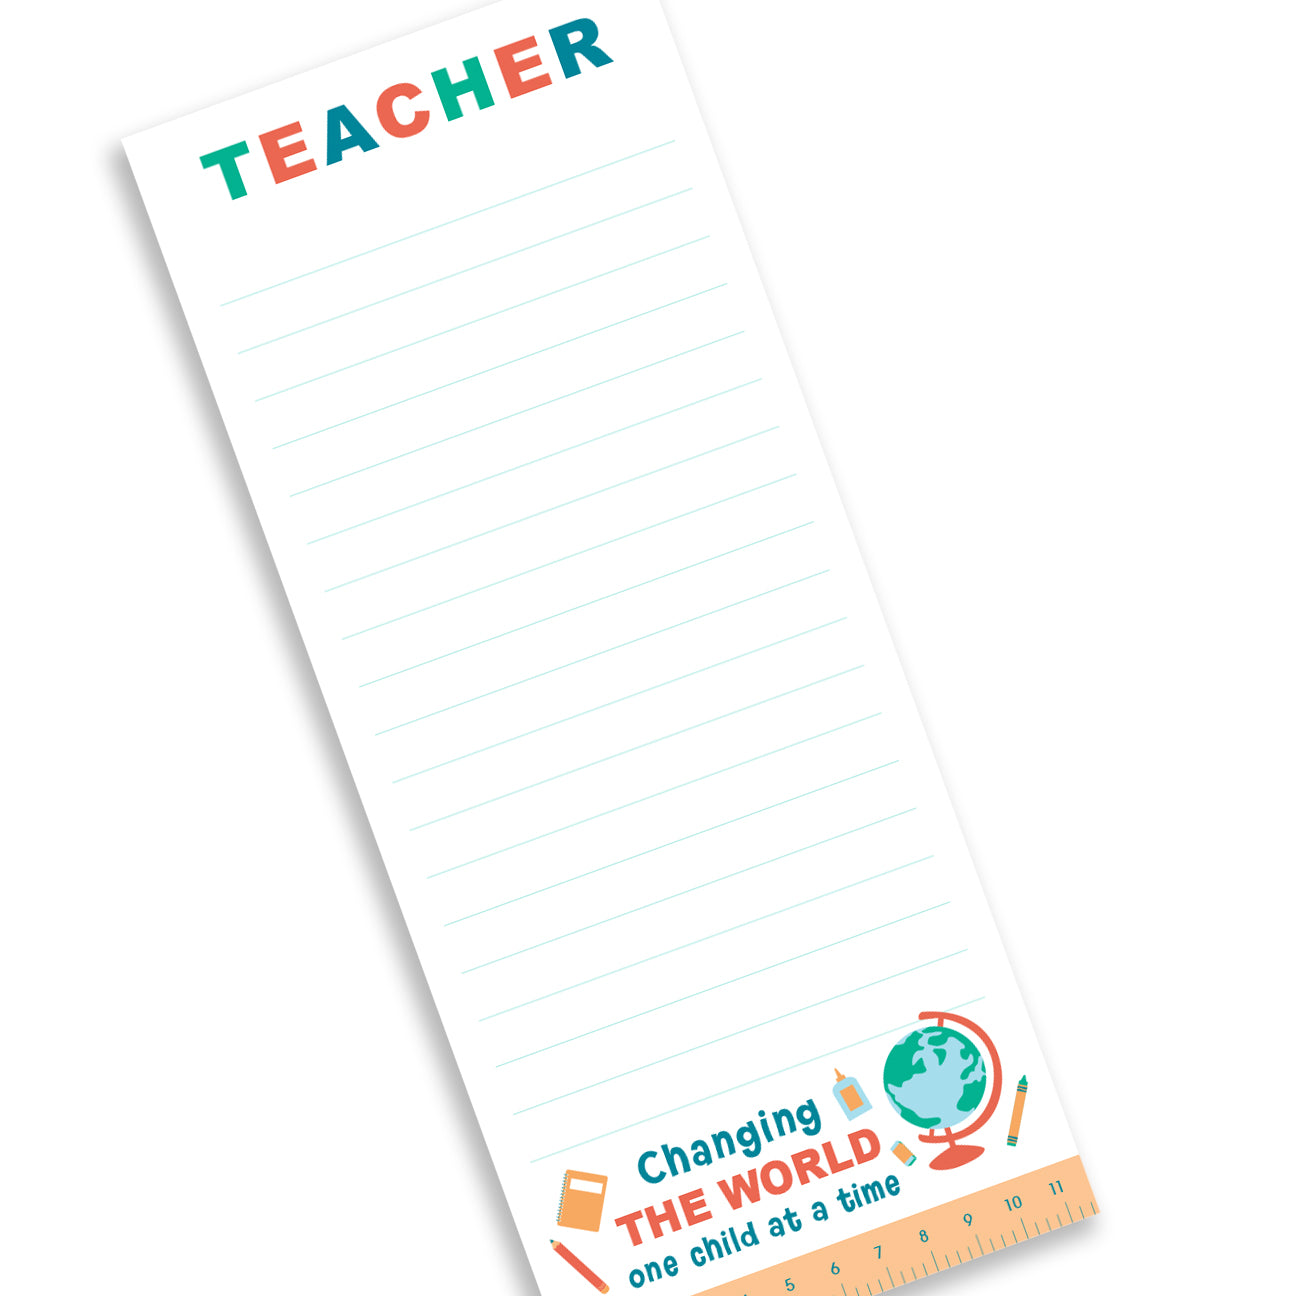 Teacher Notepad - Changing the world one child at a time